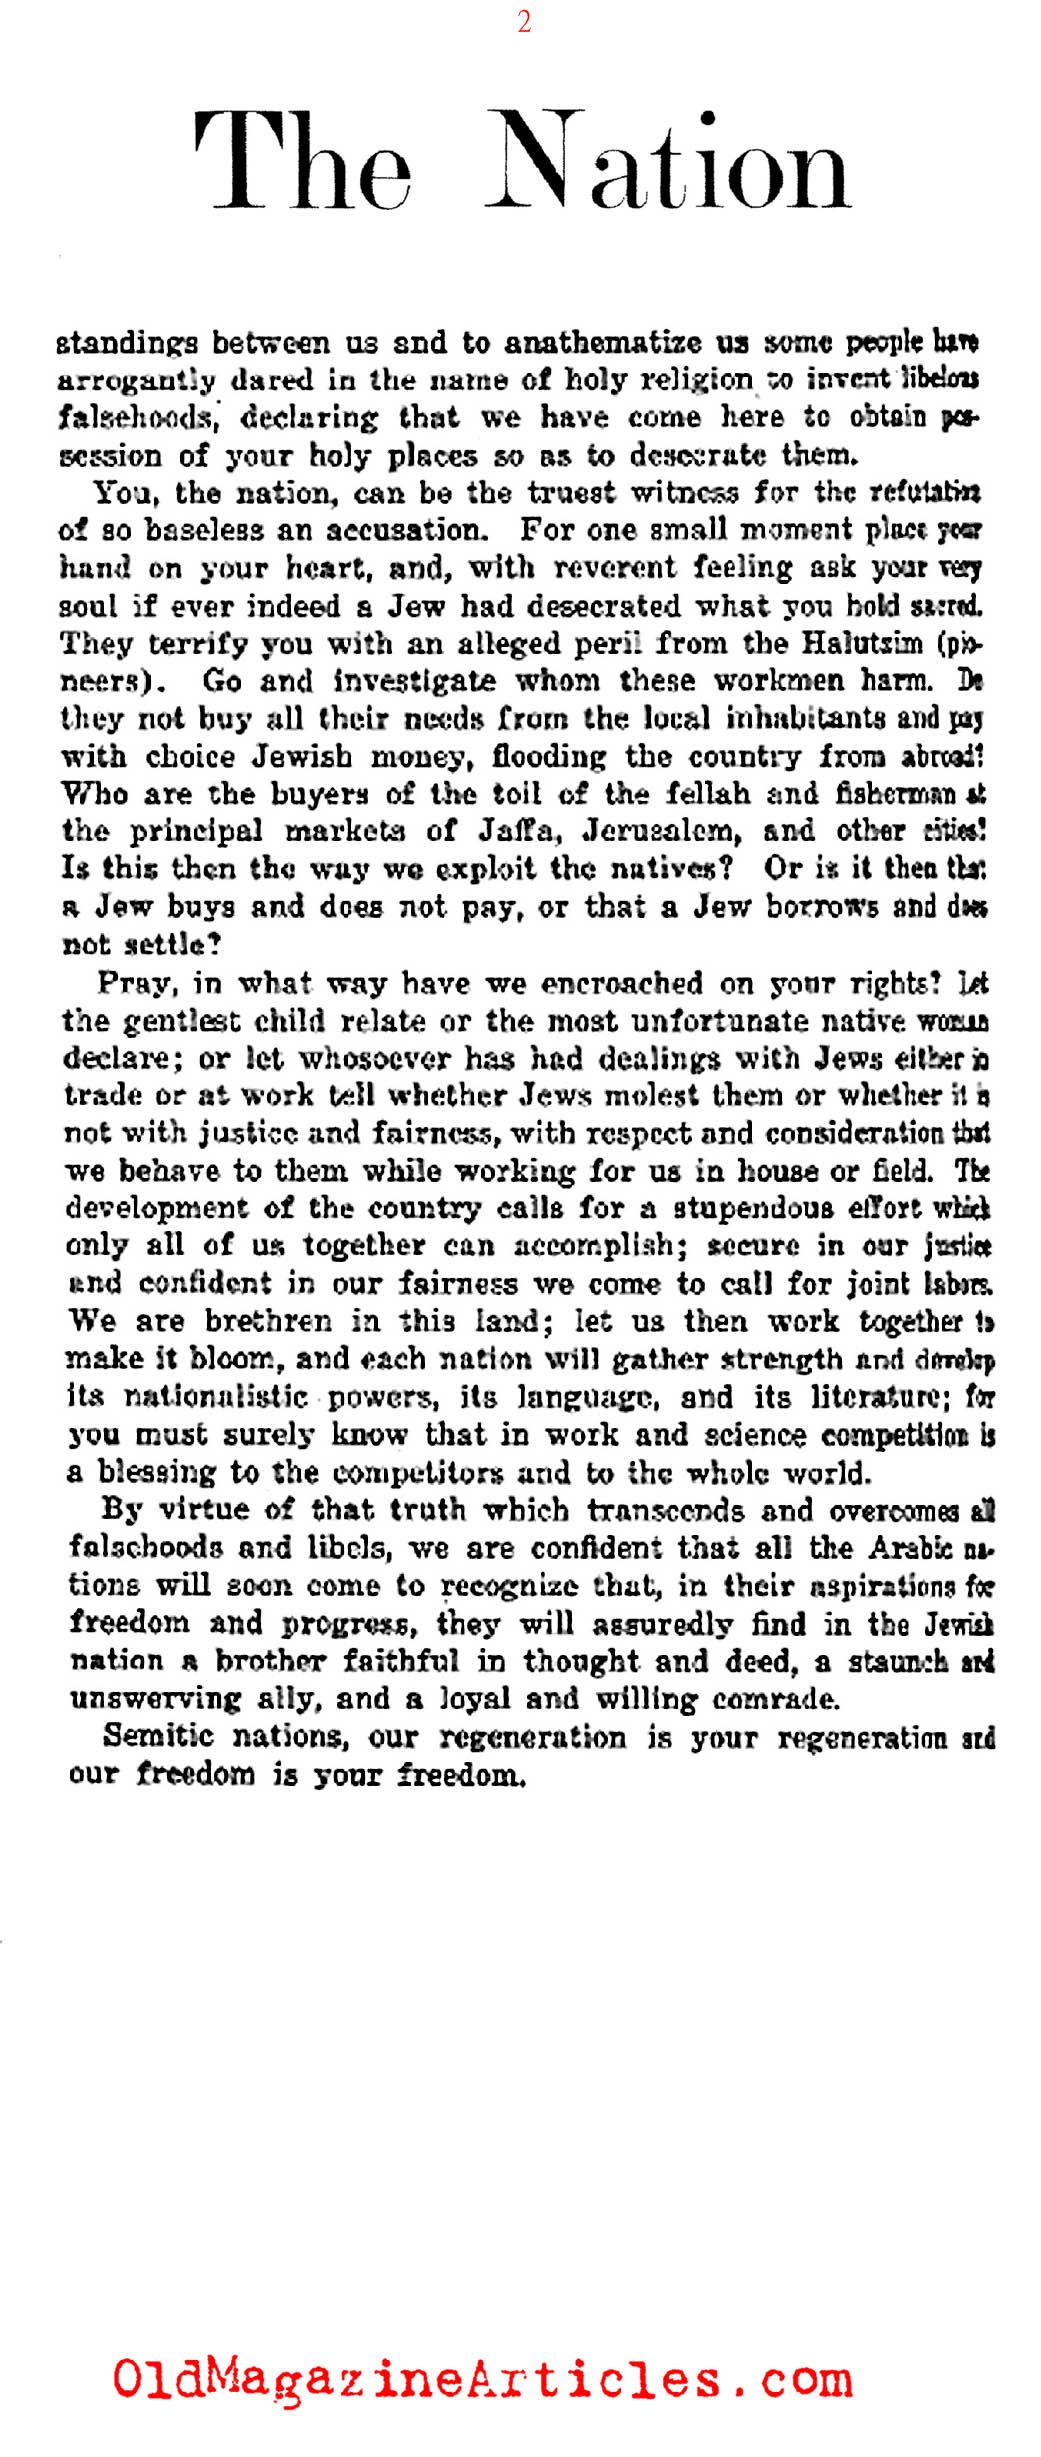 A Desire for Peace in British Palestine (The Nation, 1922)